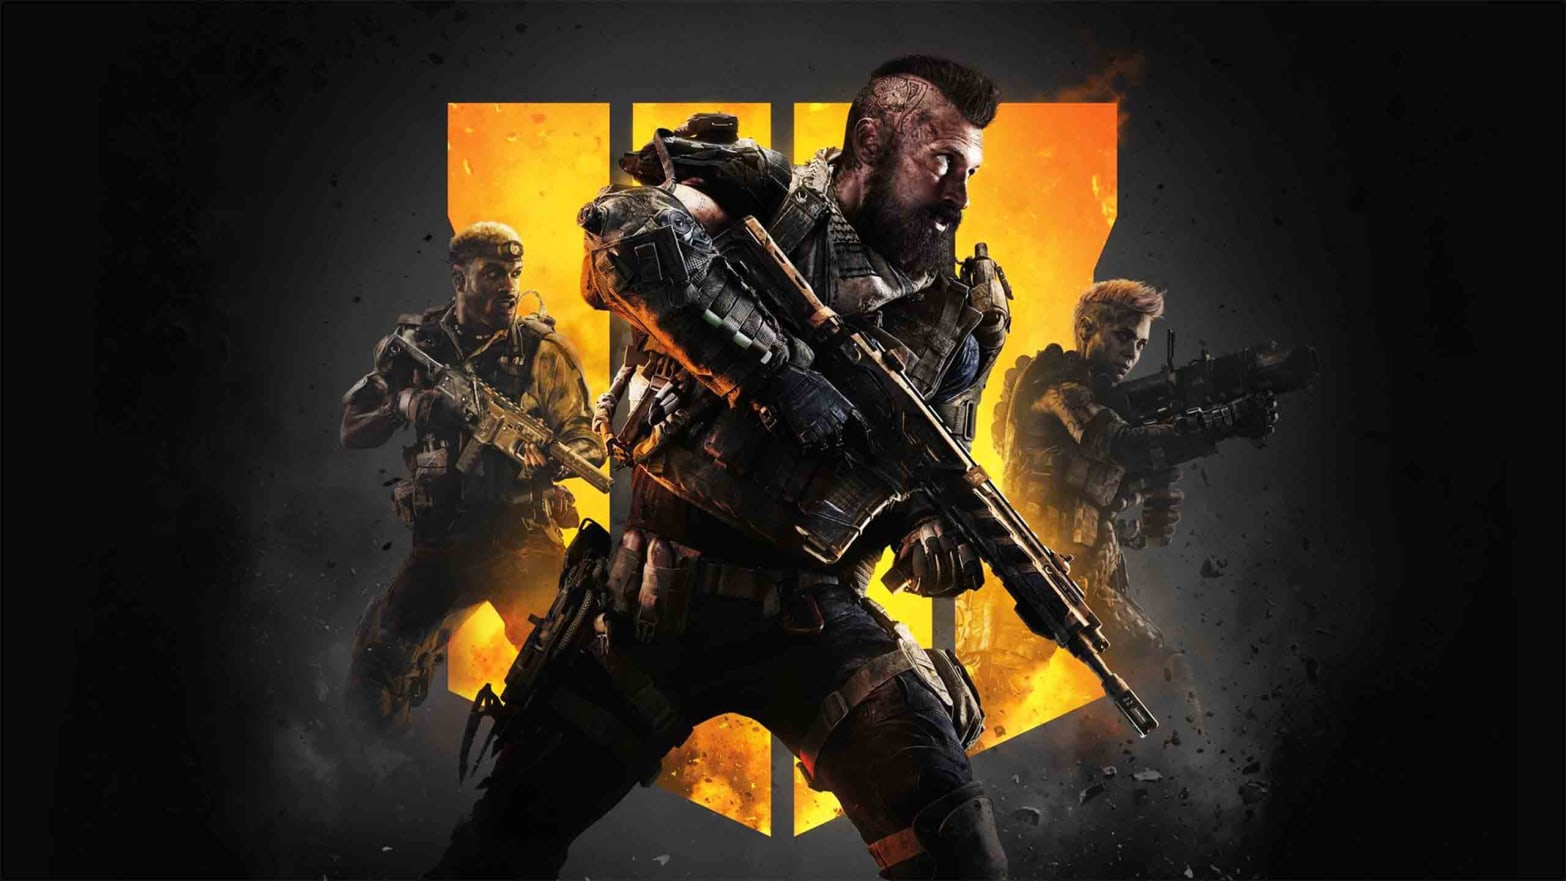 Call Of Duty: Mobile out now – includes battle royale and Zombies